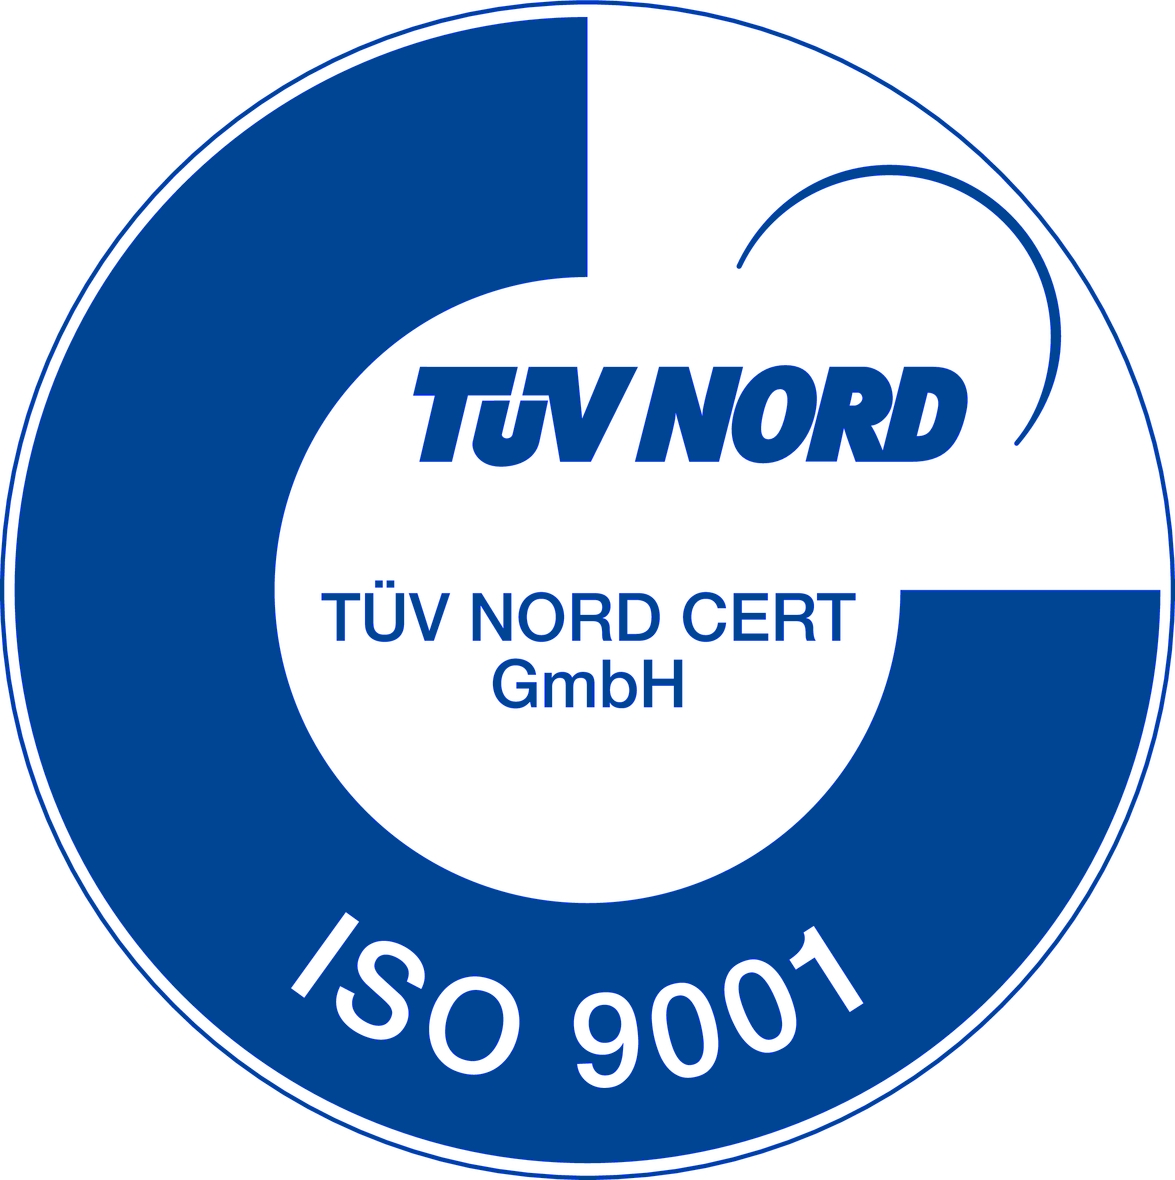 ISO 9001 CERTIFIED BY TUV NORD